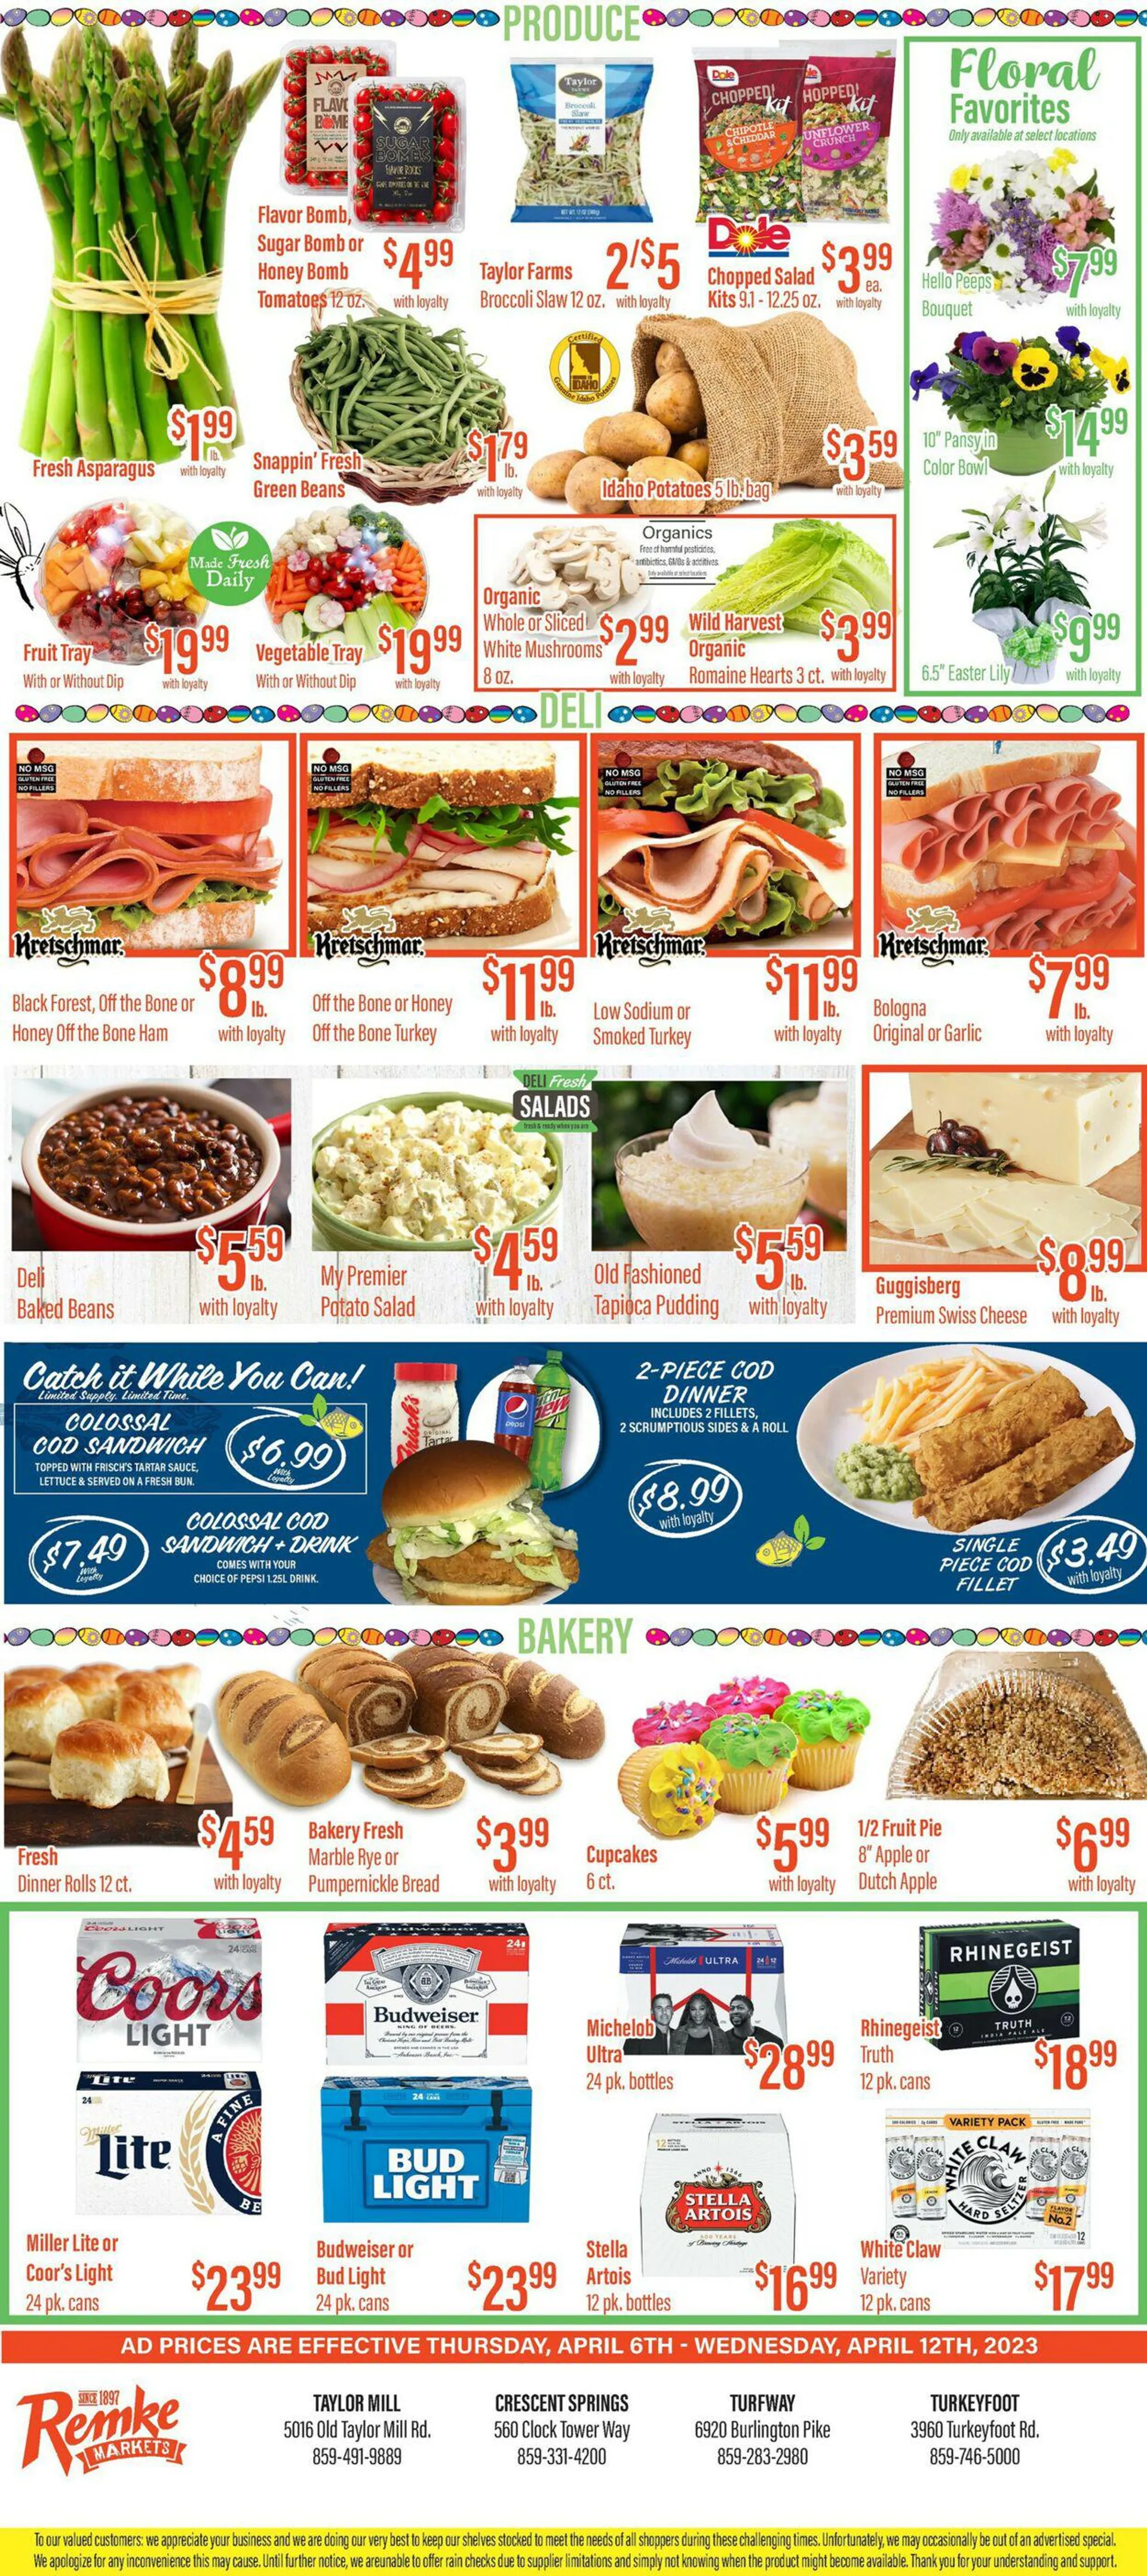 Remke Markets Current weekly ad - 5